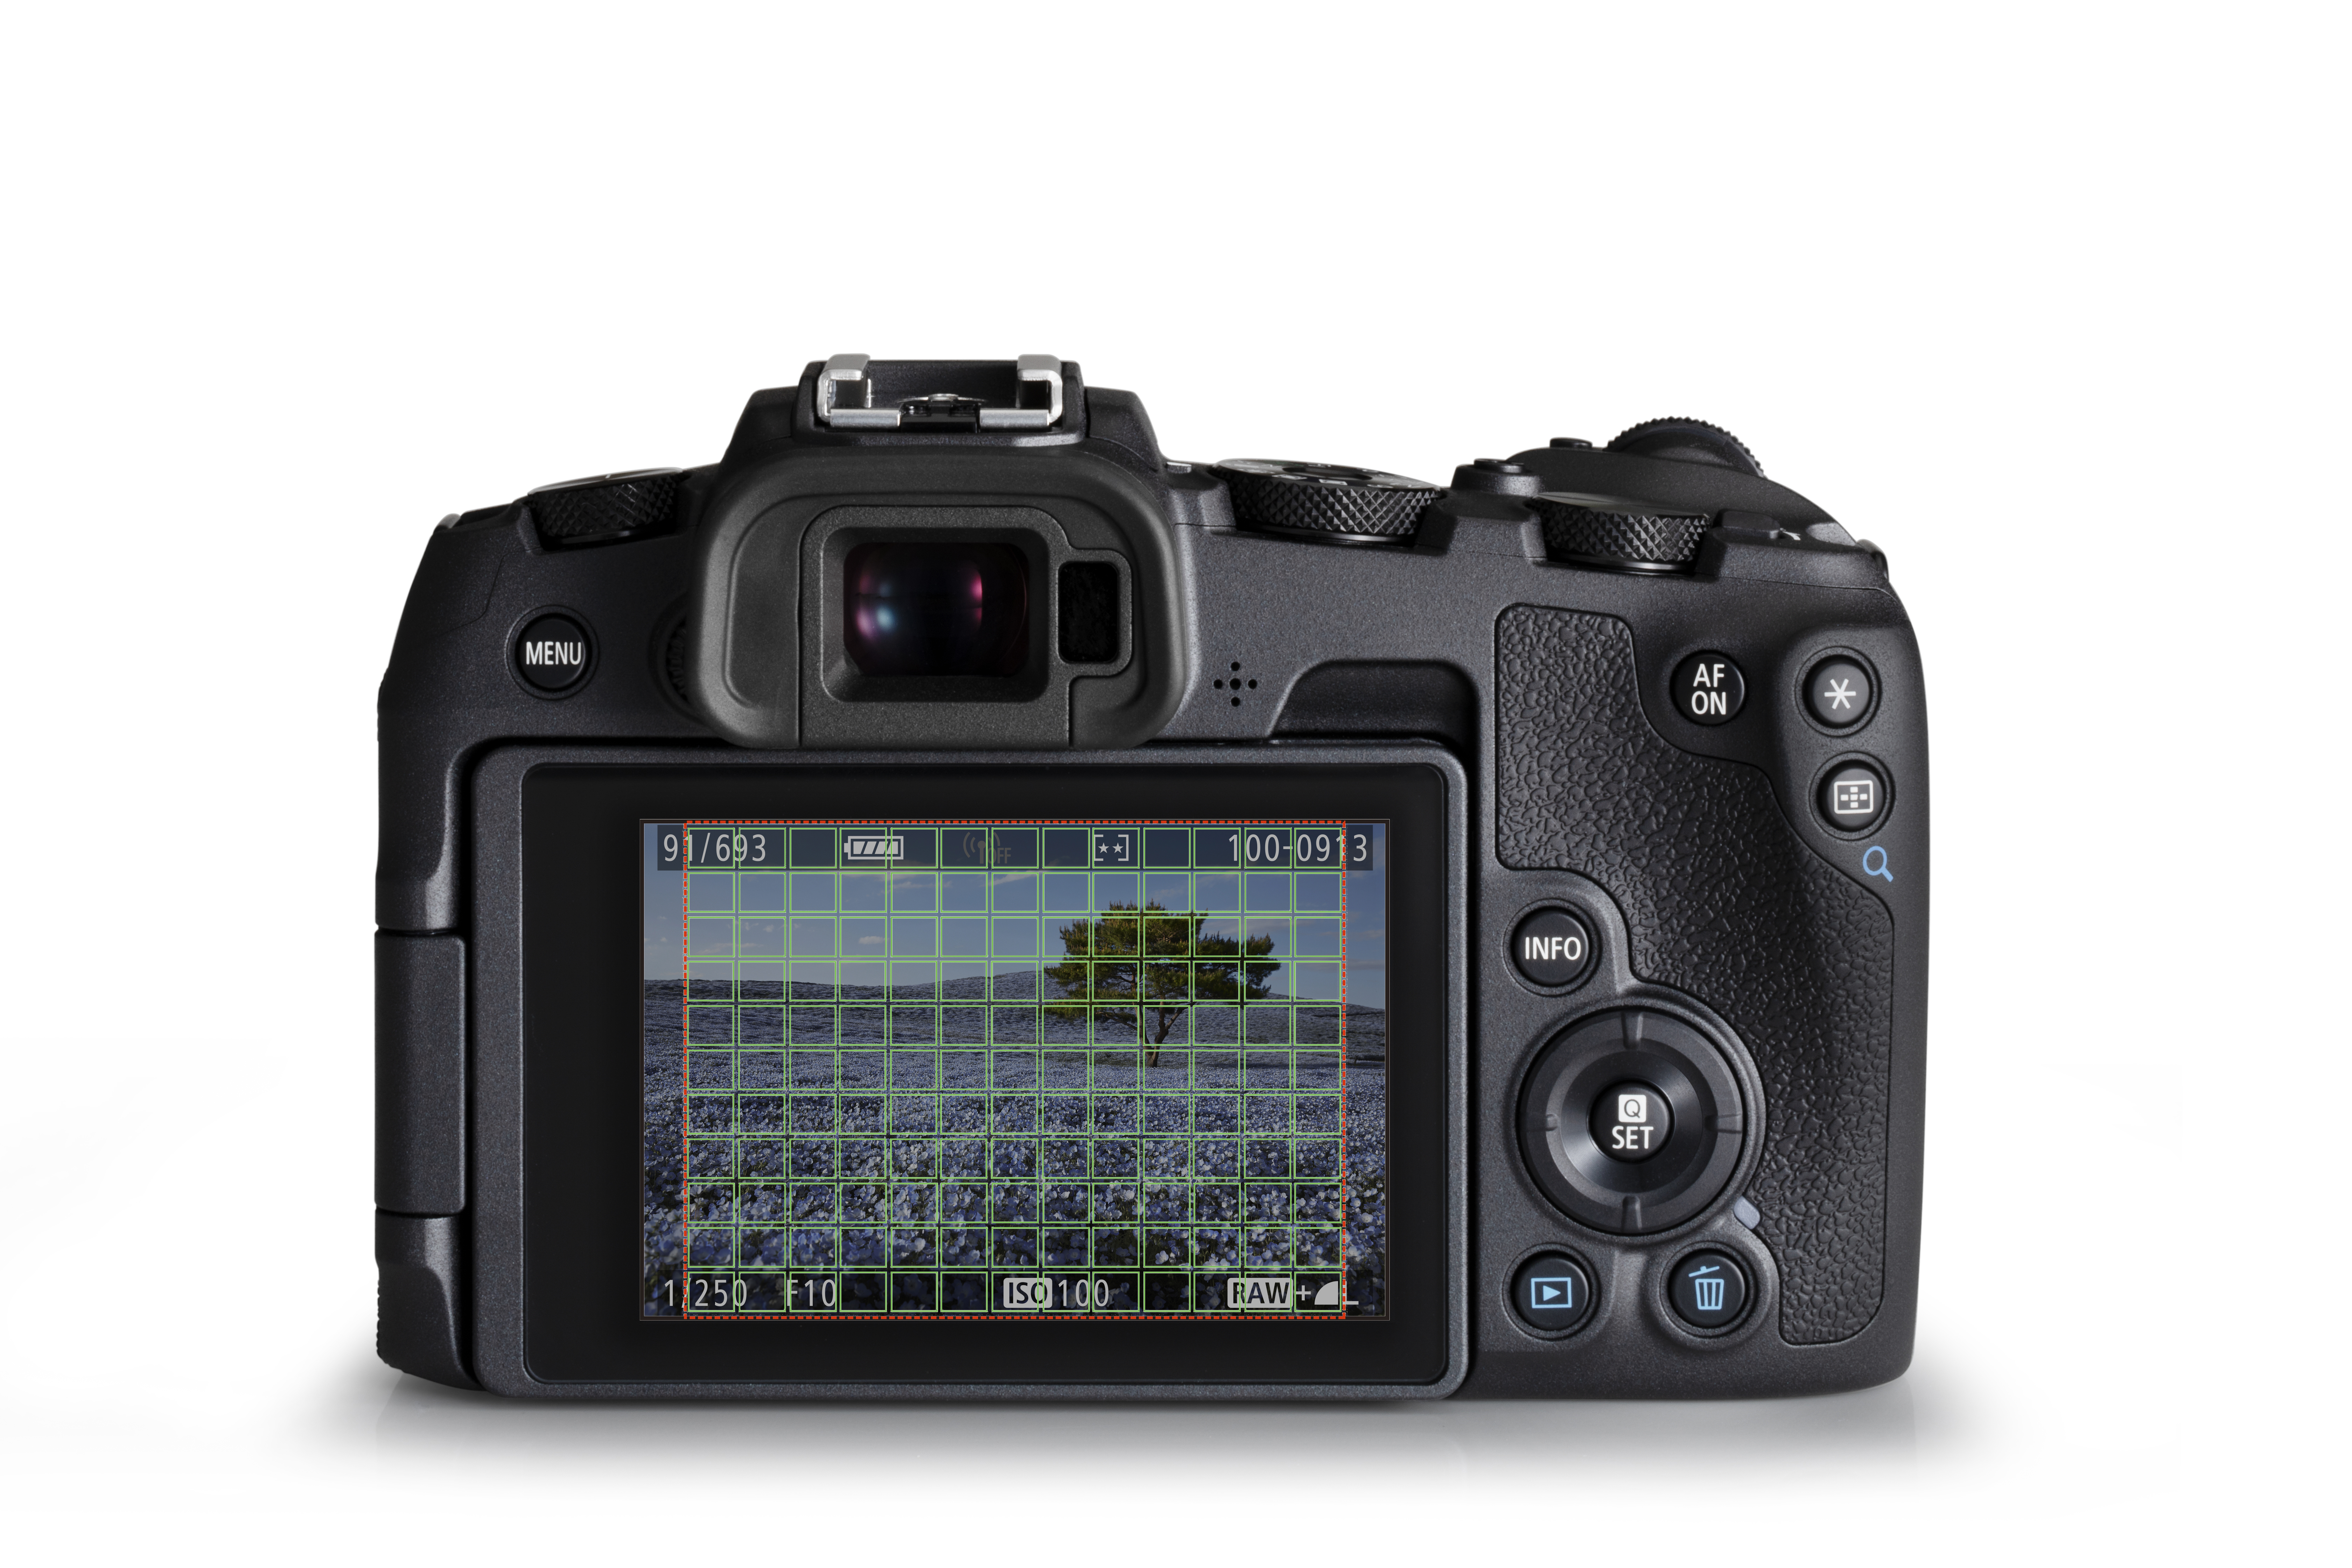 Canon EOS RP Full-frame Mirrorless Camera product image showing menu screen with grid